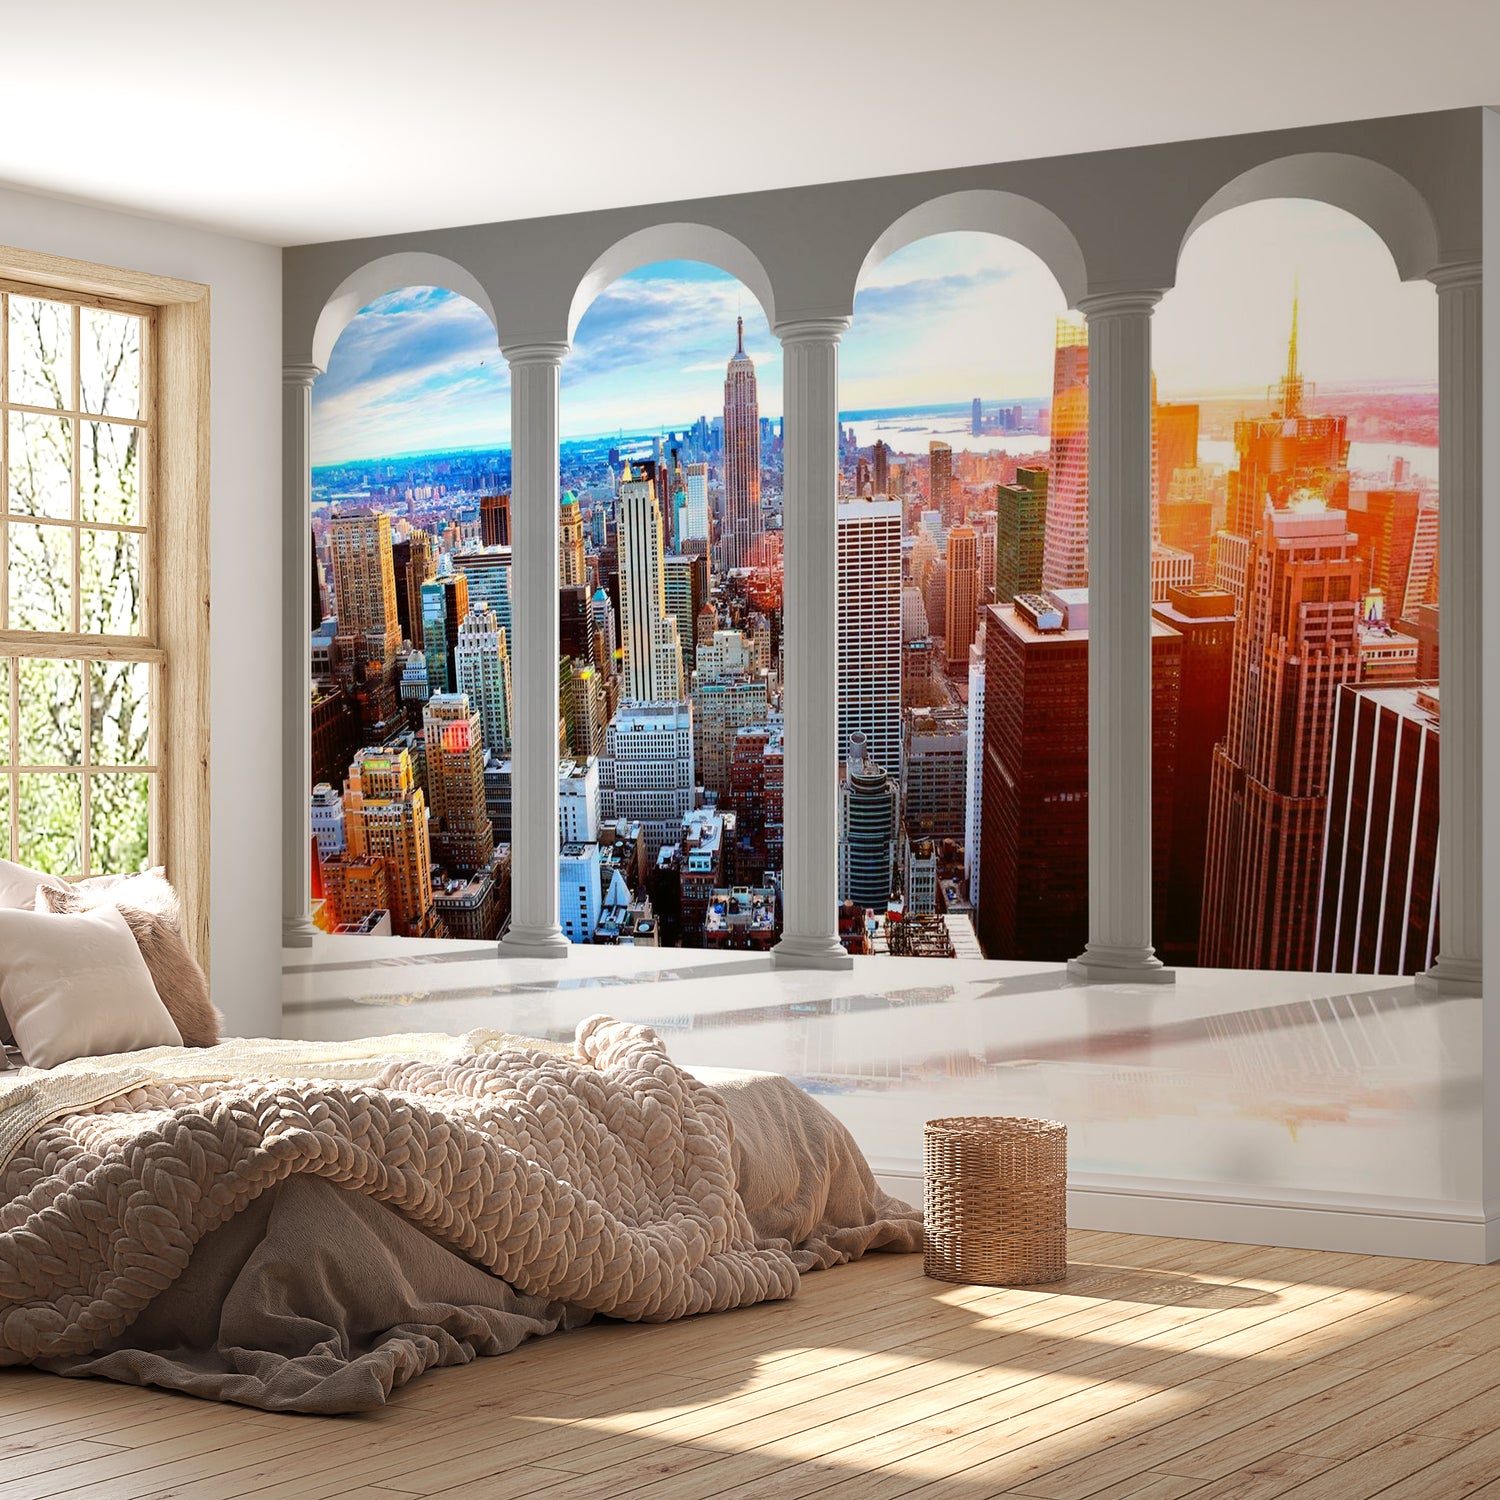 Peel & Stick Wall Mural - Pillars And New York - Removable Wall Decals